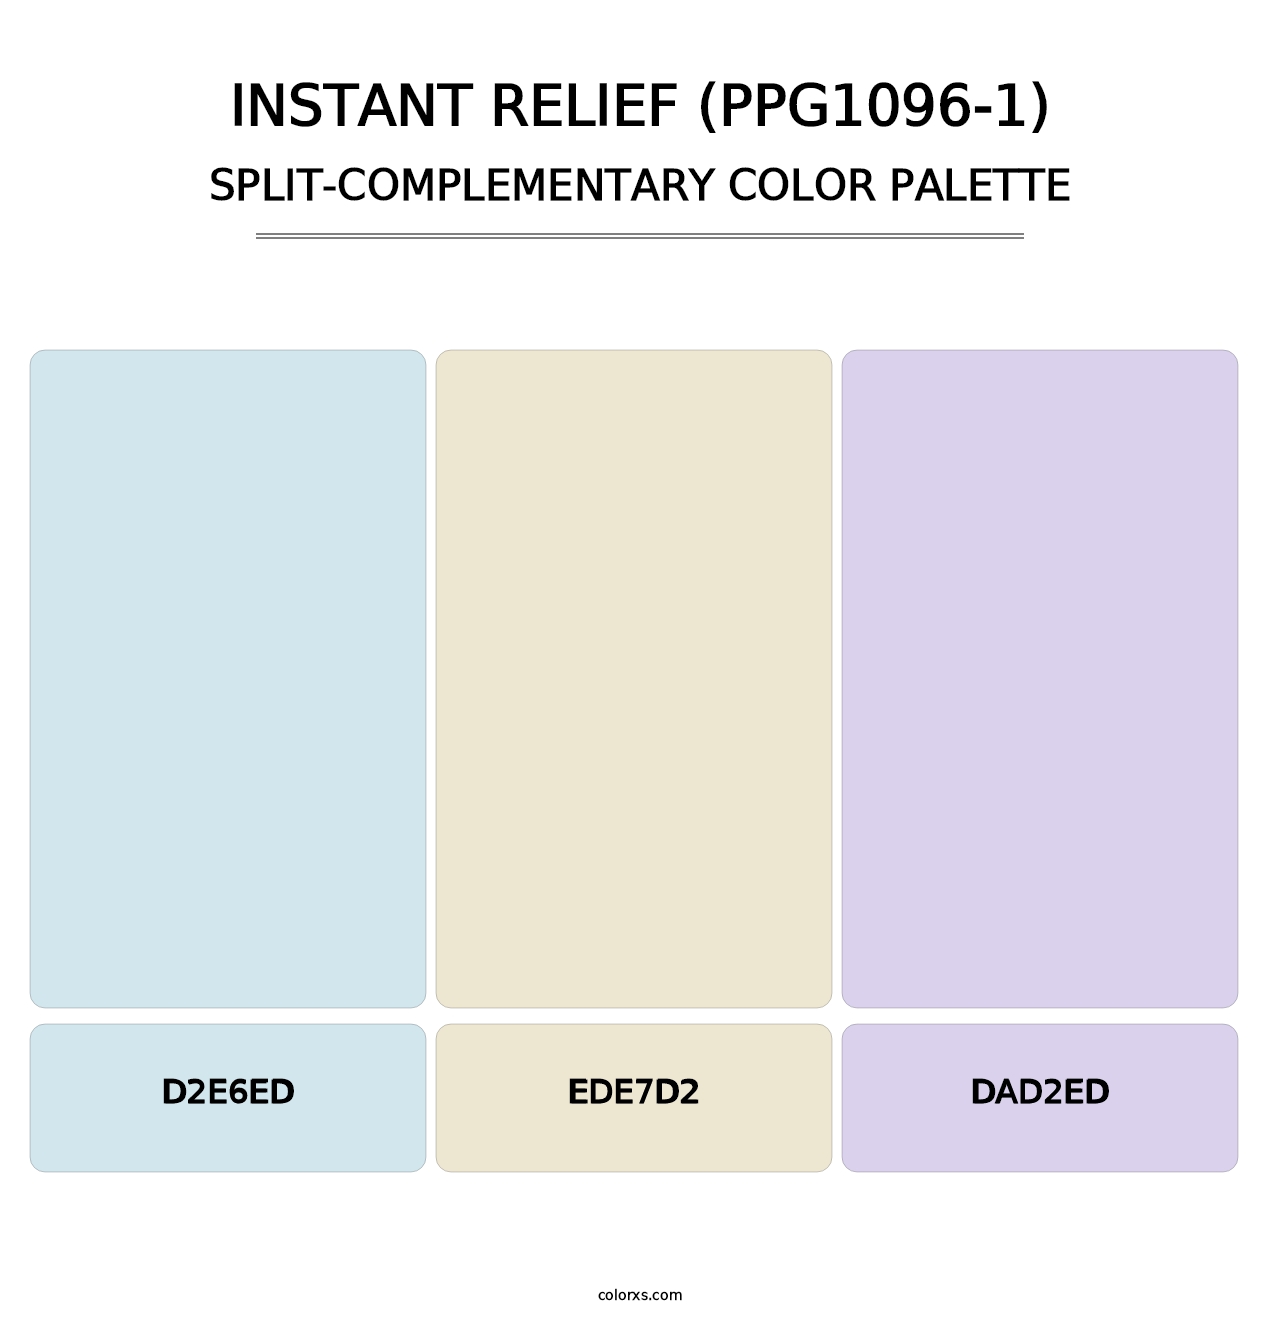 Instant Relief (PPG1096-1) - Split-Complementary Color Palette